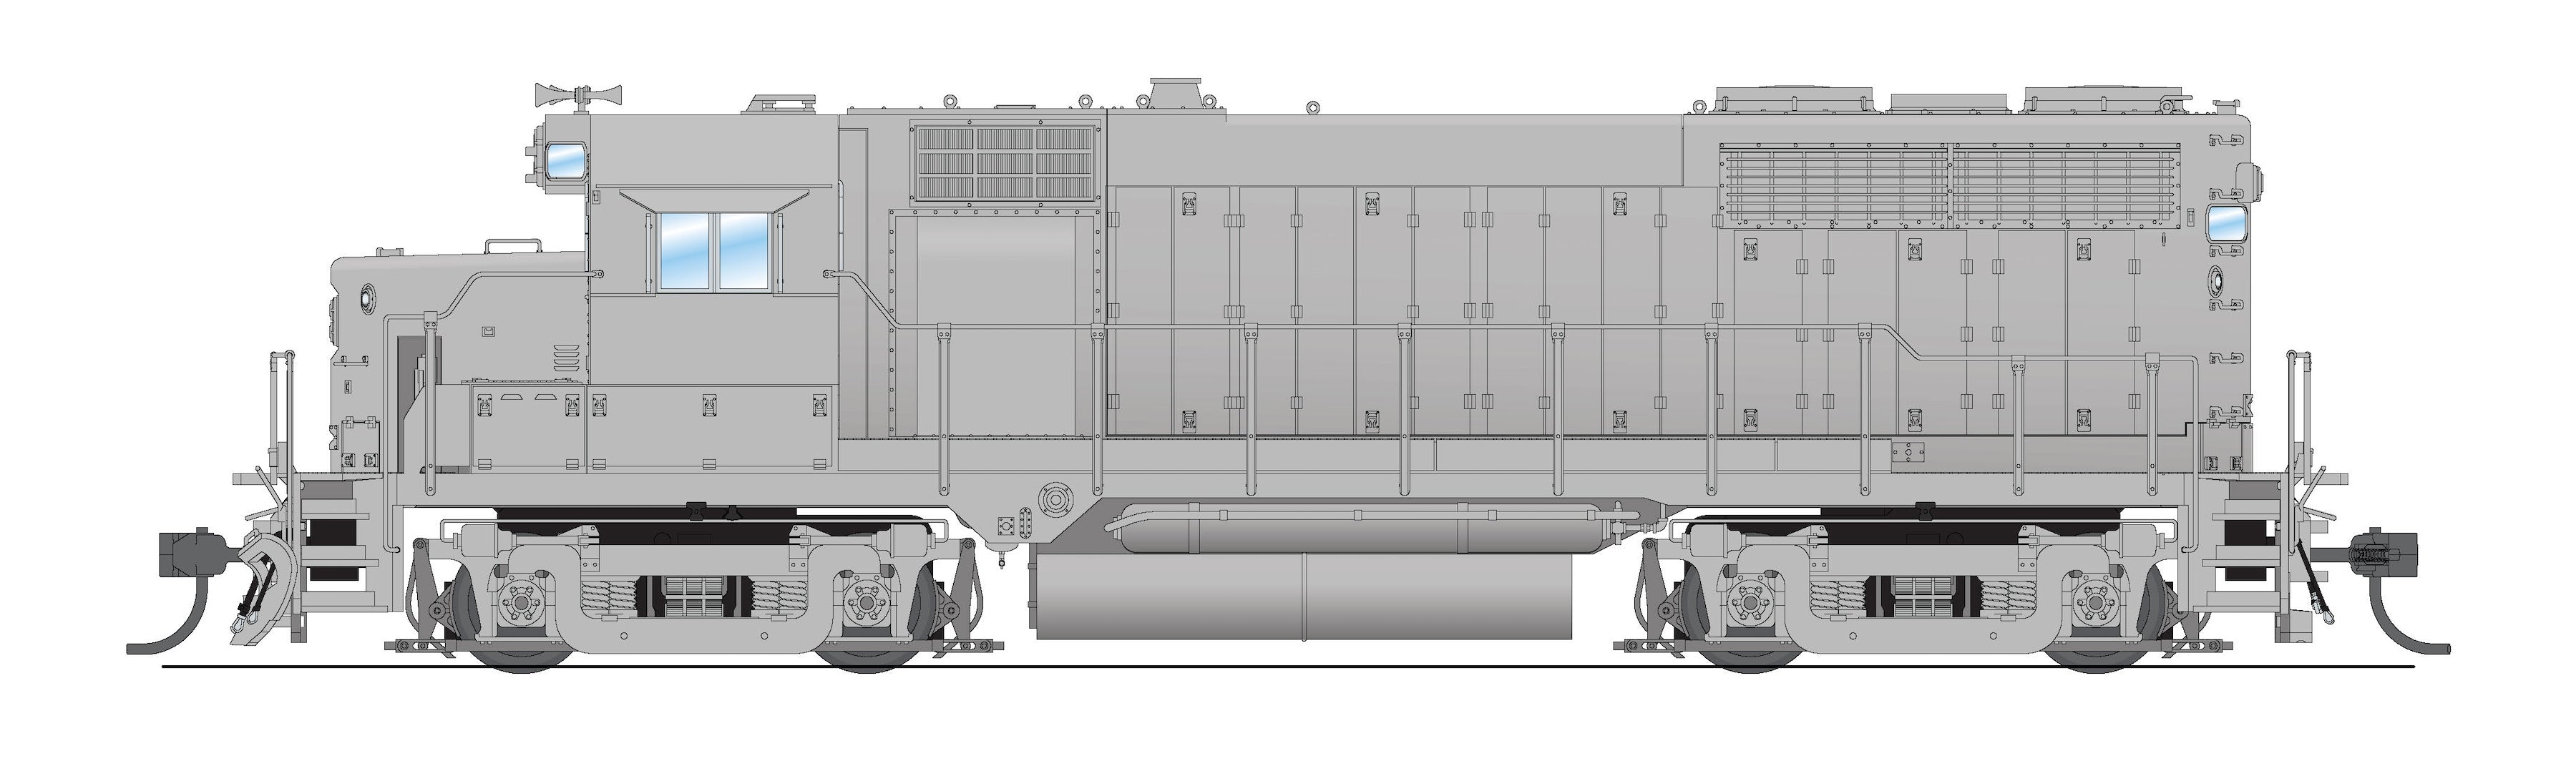 8912 EMD GP35, Unpainted, TSBY Details, No-Sound / DCC-Ready, HO (Smokebox Graphics Exclusive)